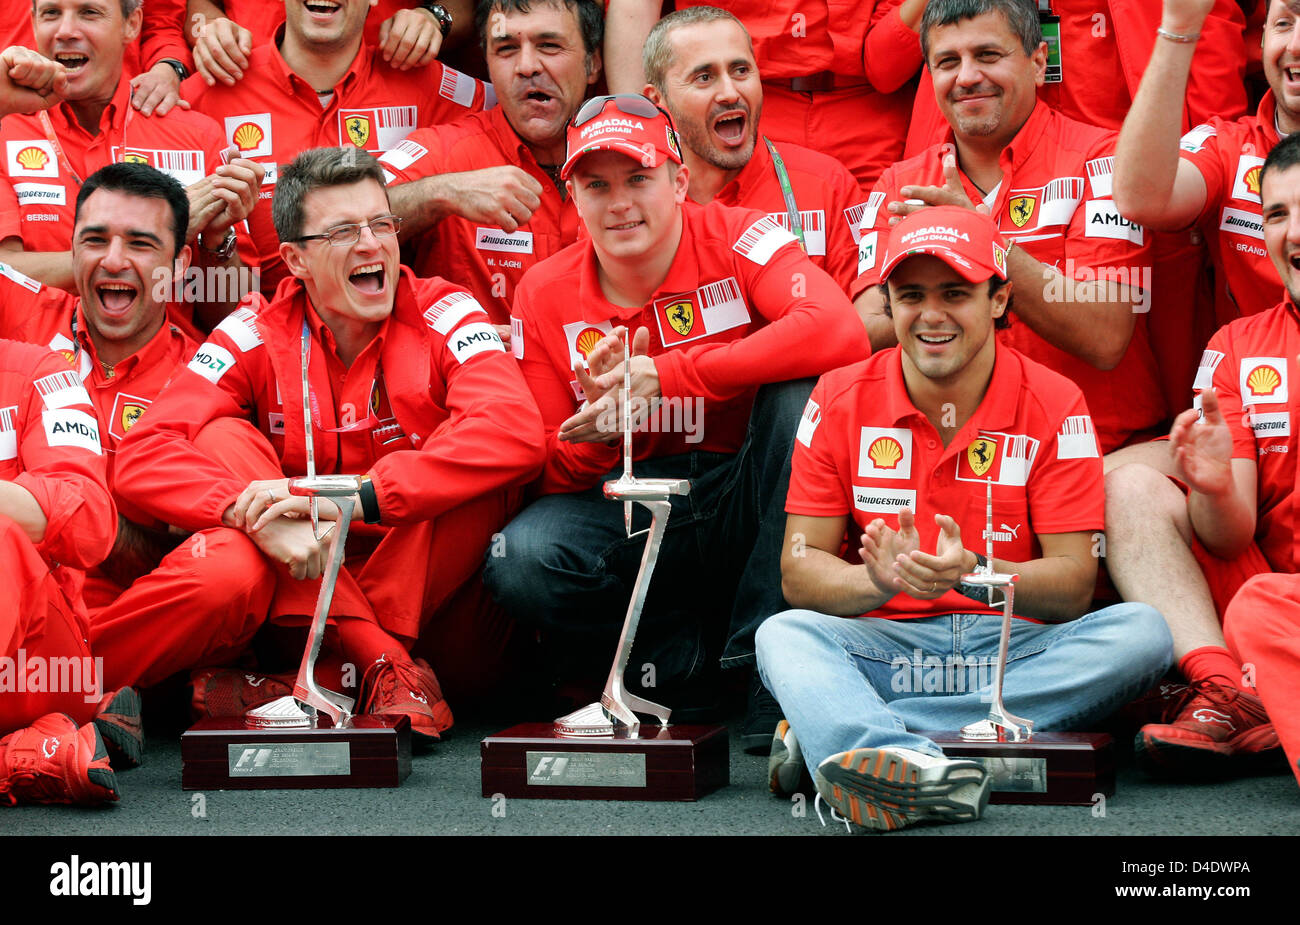 Australian race engineer Chris Dyer (front 2-L), first placed Finnish Formula One driver Kimi Raikkonen (C) and second placed Brazilian Formula One driver Felipe Massa pose for the team picture of Scuderia Ferrari after the Formula 1 Grand Prix of Spain at Circuit de Catalunya in Montmelo near Barcelona, Spain, 27 April 2008. Photo: FELIX HEYDER Stock Photo